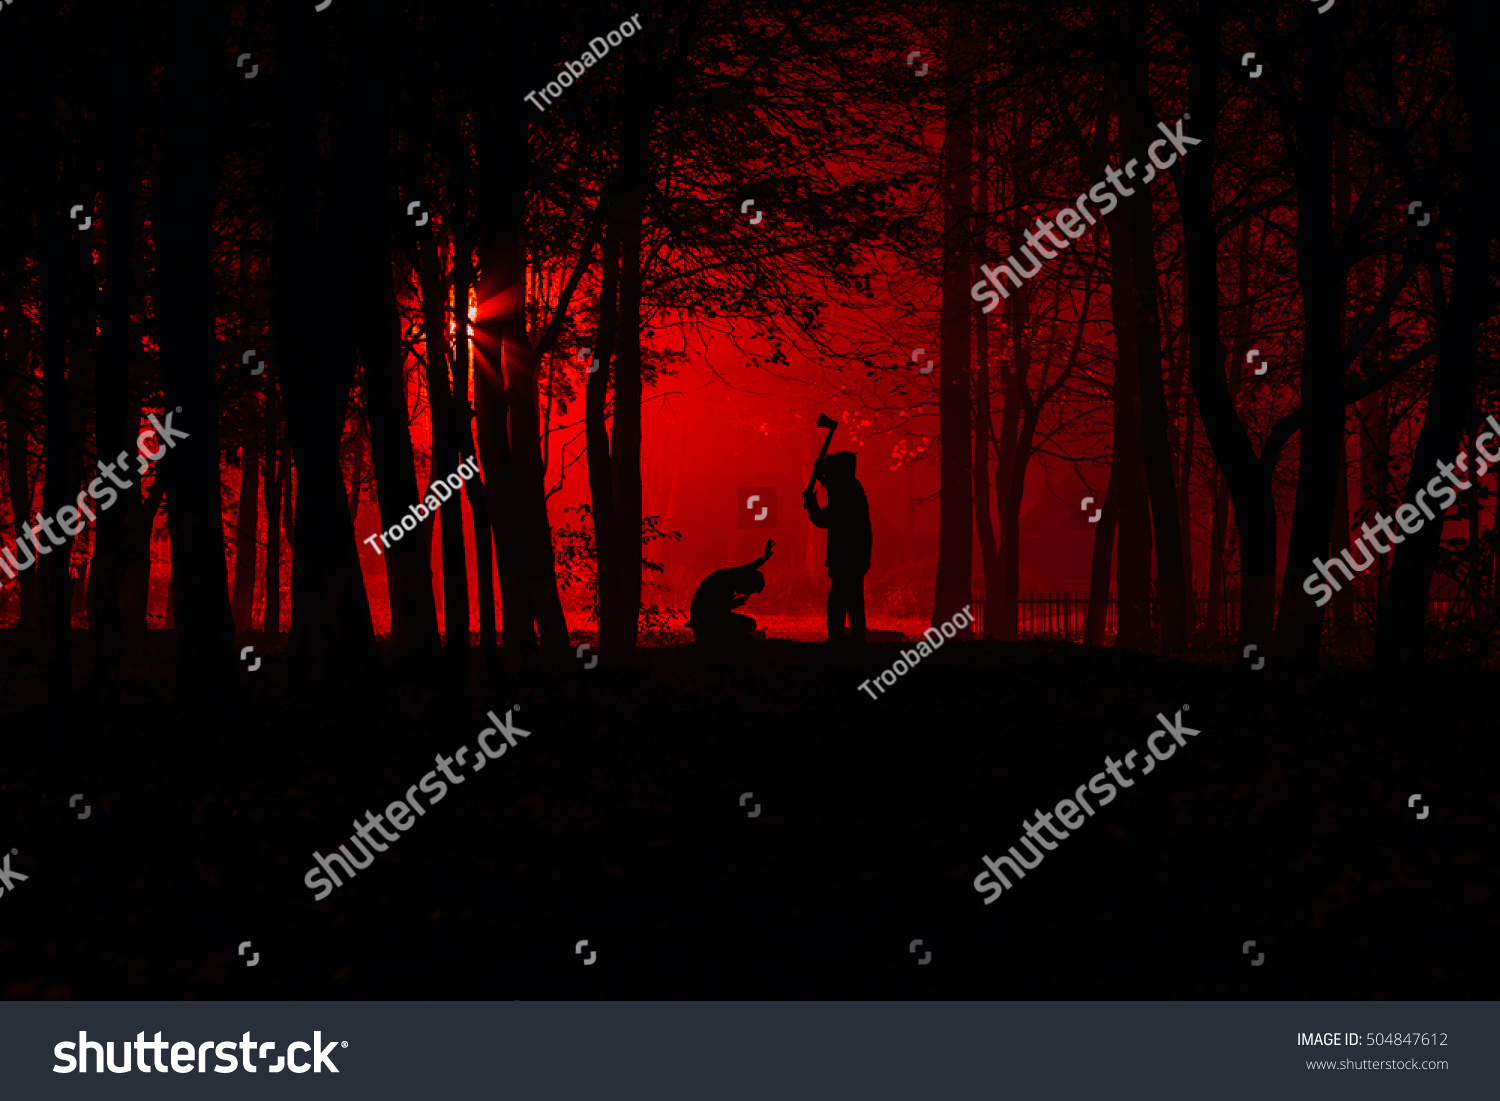 Maniac swings ax on his prey. Murder in the park. Maniac kills his victim in the night deserted park. Silhouettes in night foggy forest #504847612